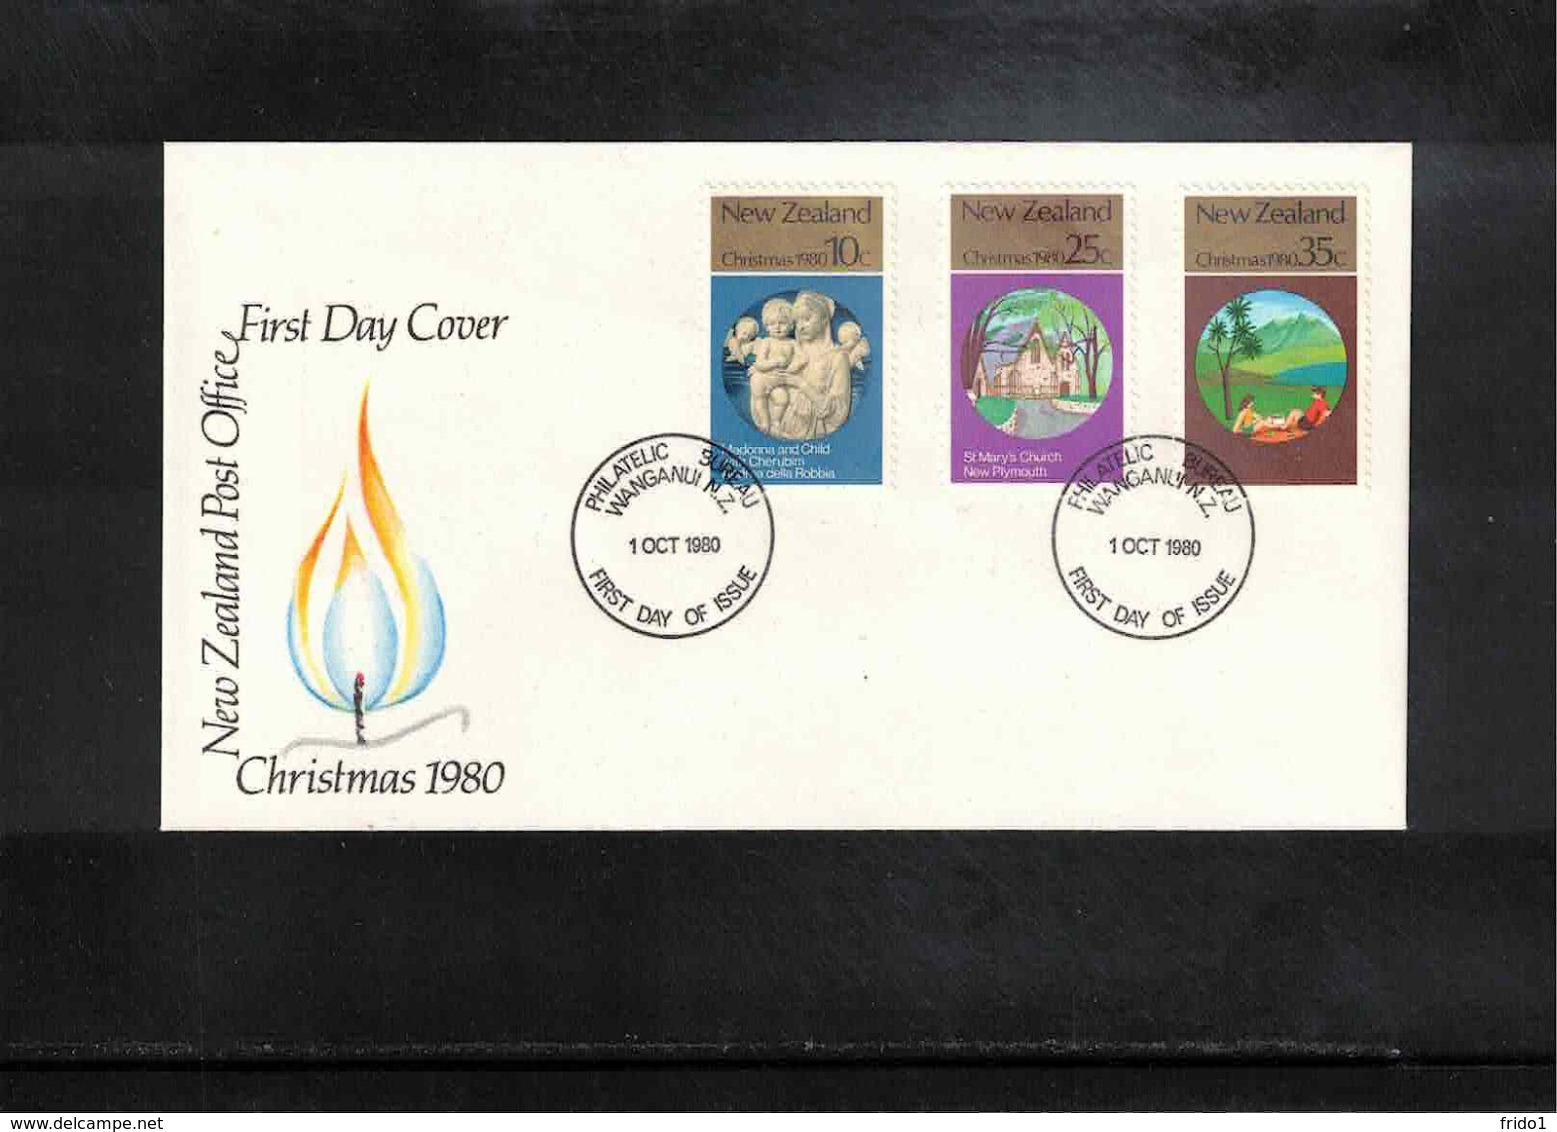 New Zealand 1980 Christmas FDC - FDC